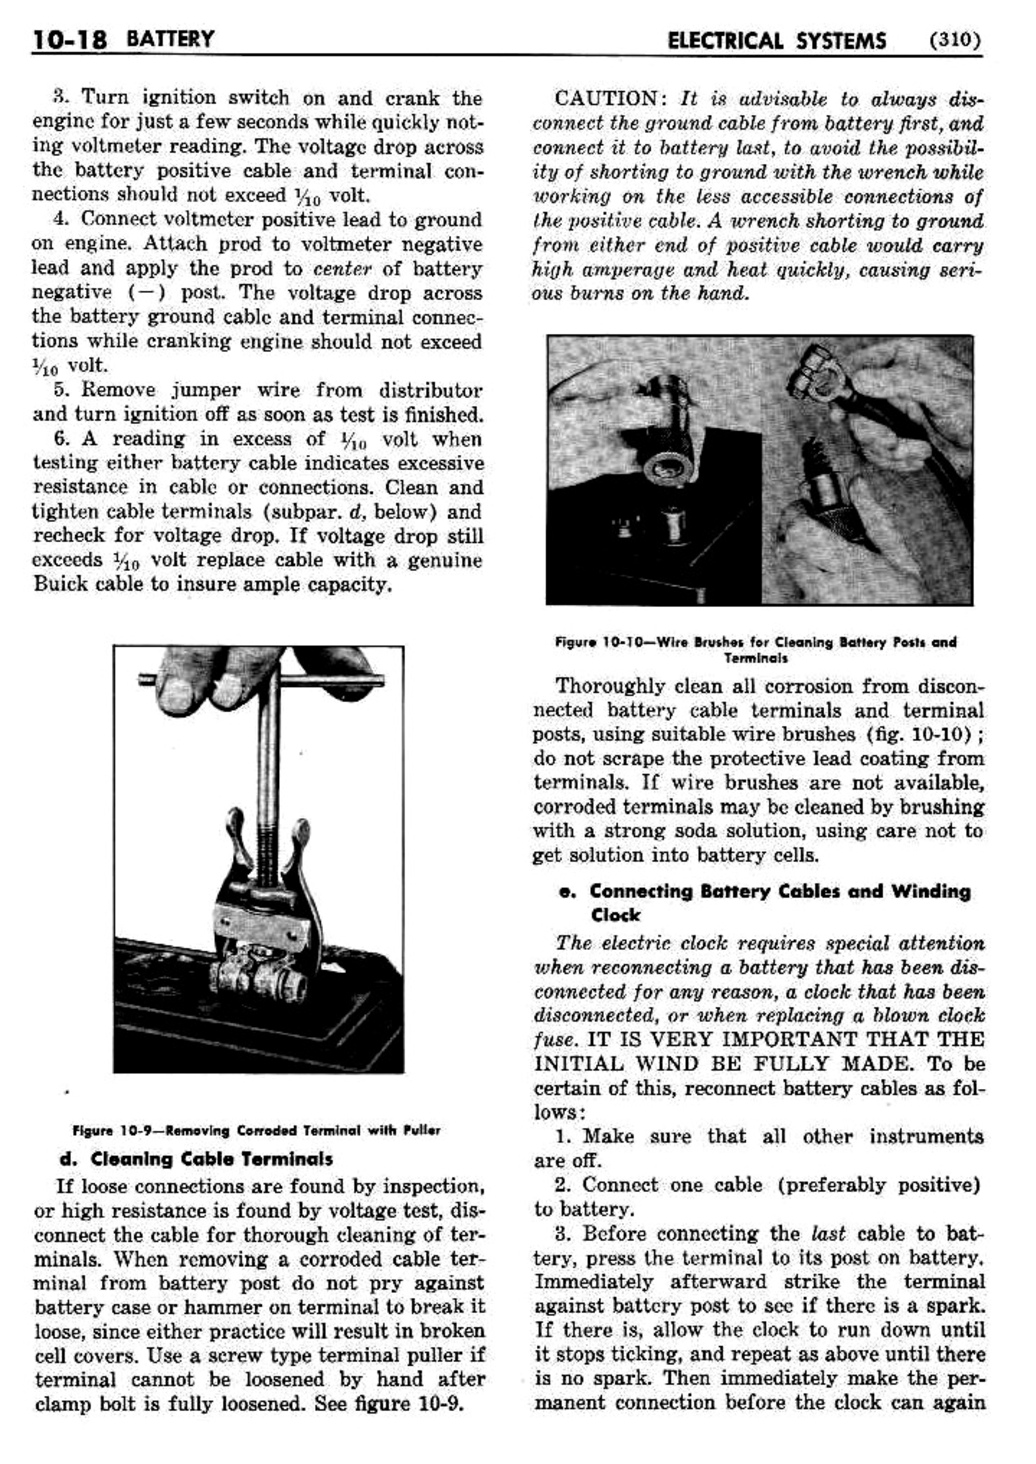 n_11 1951 Buick Shop Manual - Electrical Systems-018-018.jpg